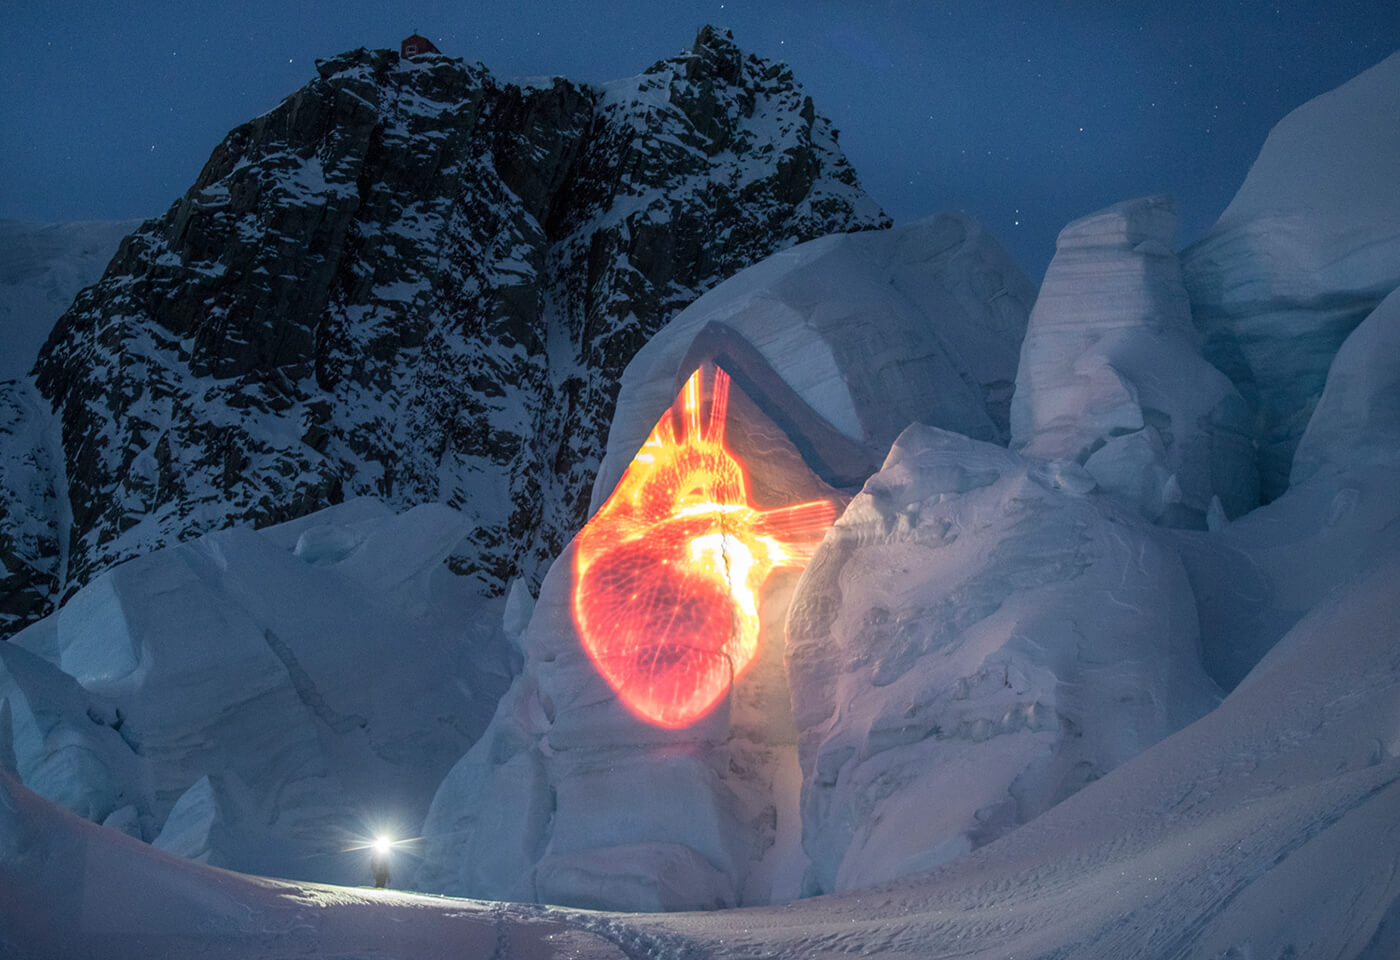 Heart image projected on glacier